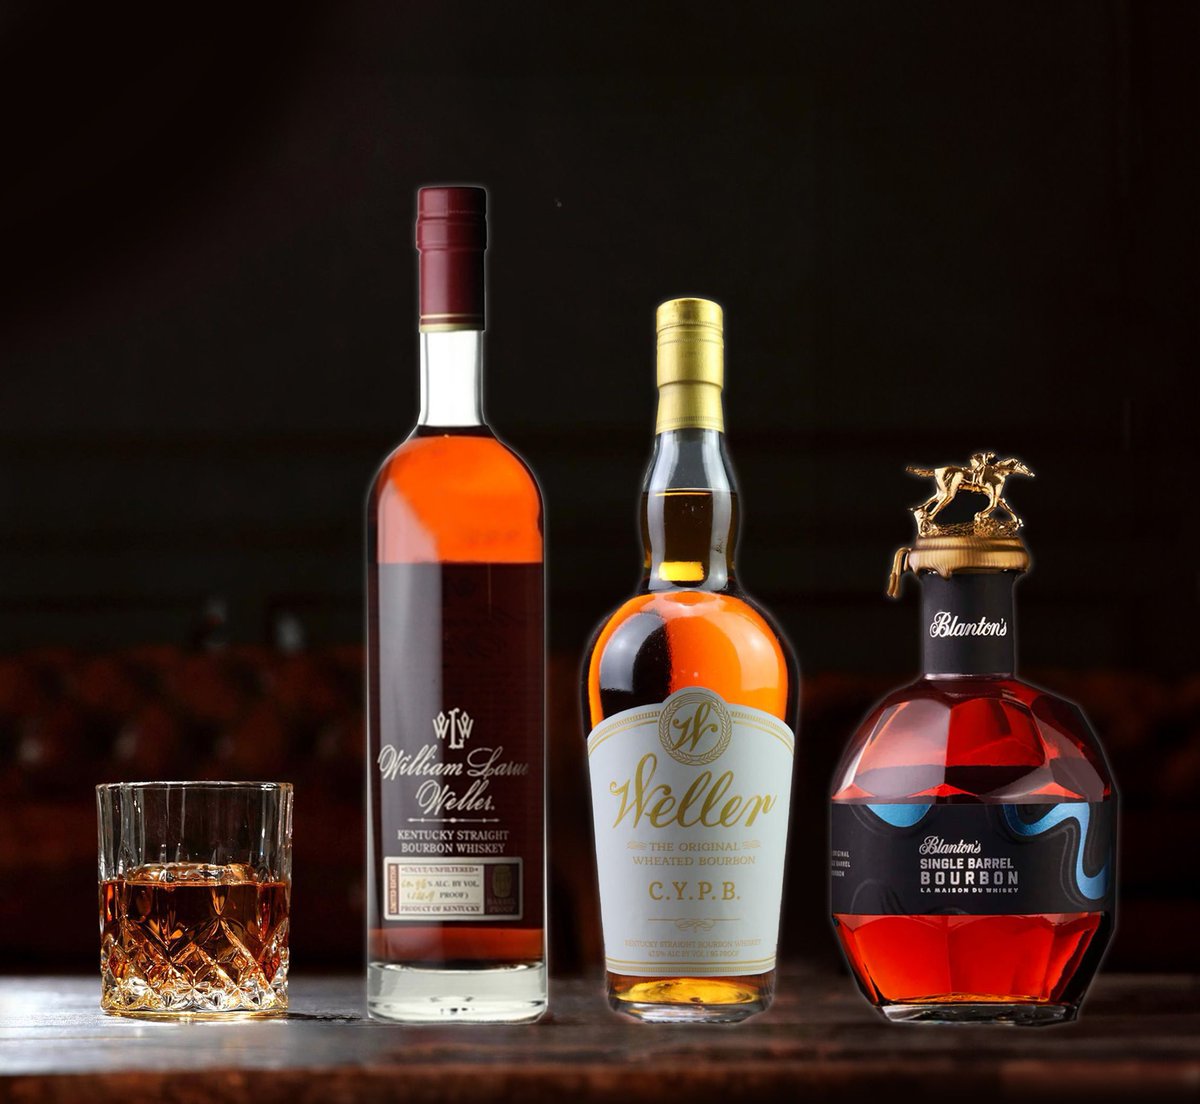 In honor of International Whisk(e)y Day today, enjoy free shipping on all orders sitewide. Just use the code WHISKEYDAY at checkout to redeem this offer, valid until midnight Tuesday 2nd April. Shop now: buff.ly/3h7qH33